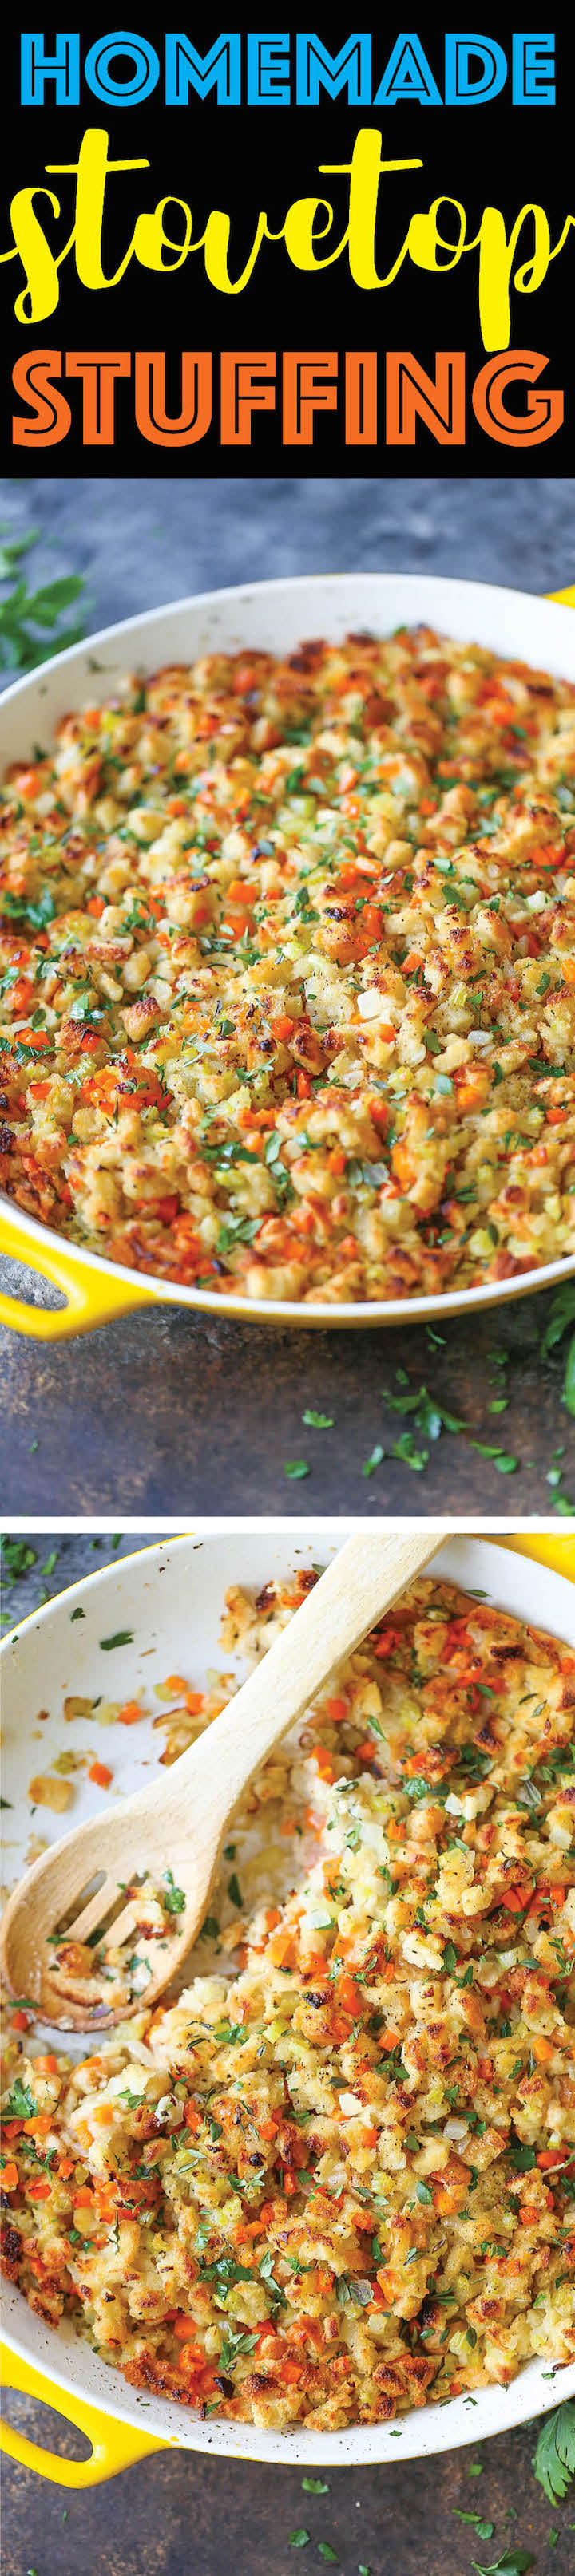 10 Things You Should Know Before Eating Stove Top Stuffing 